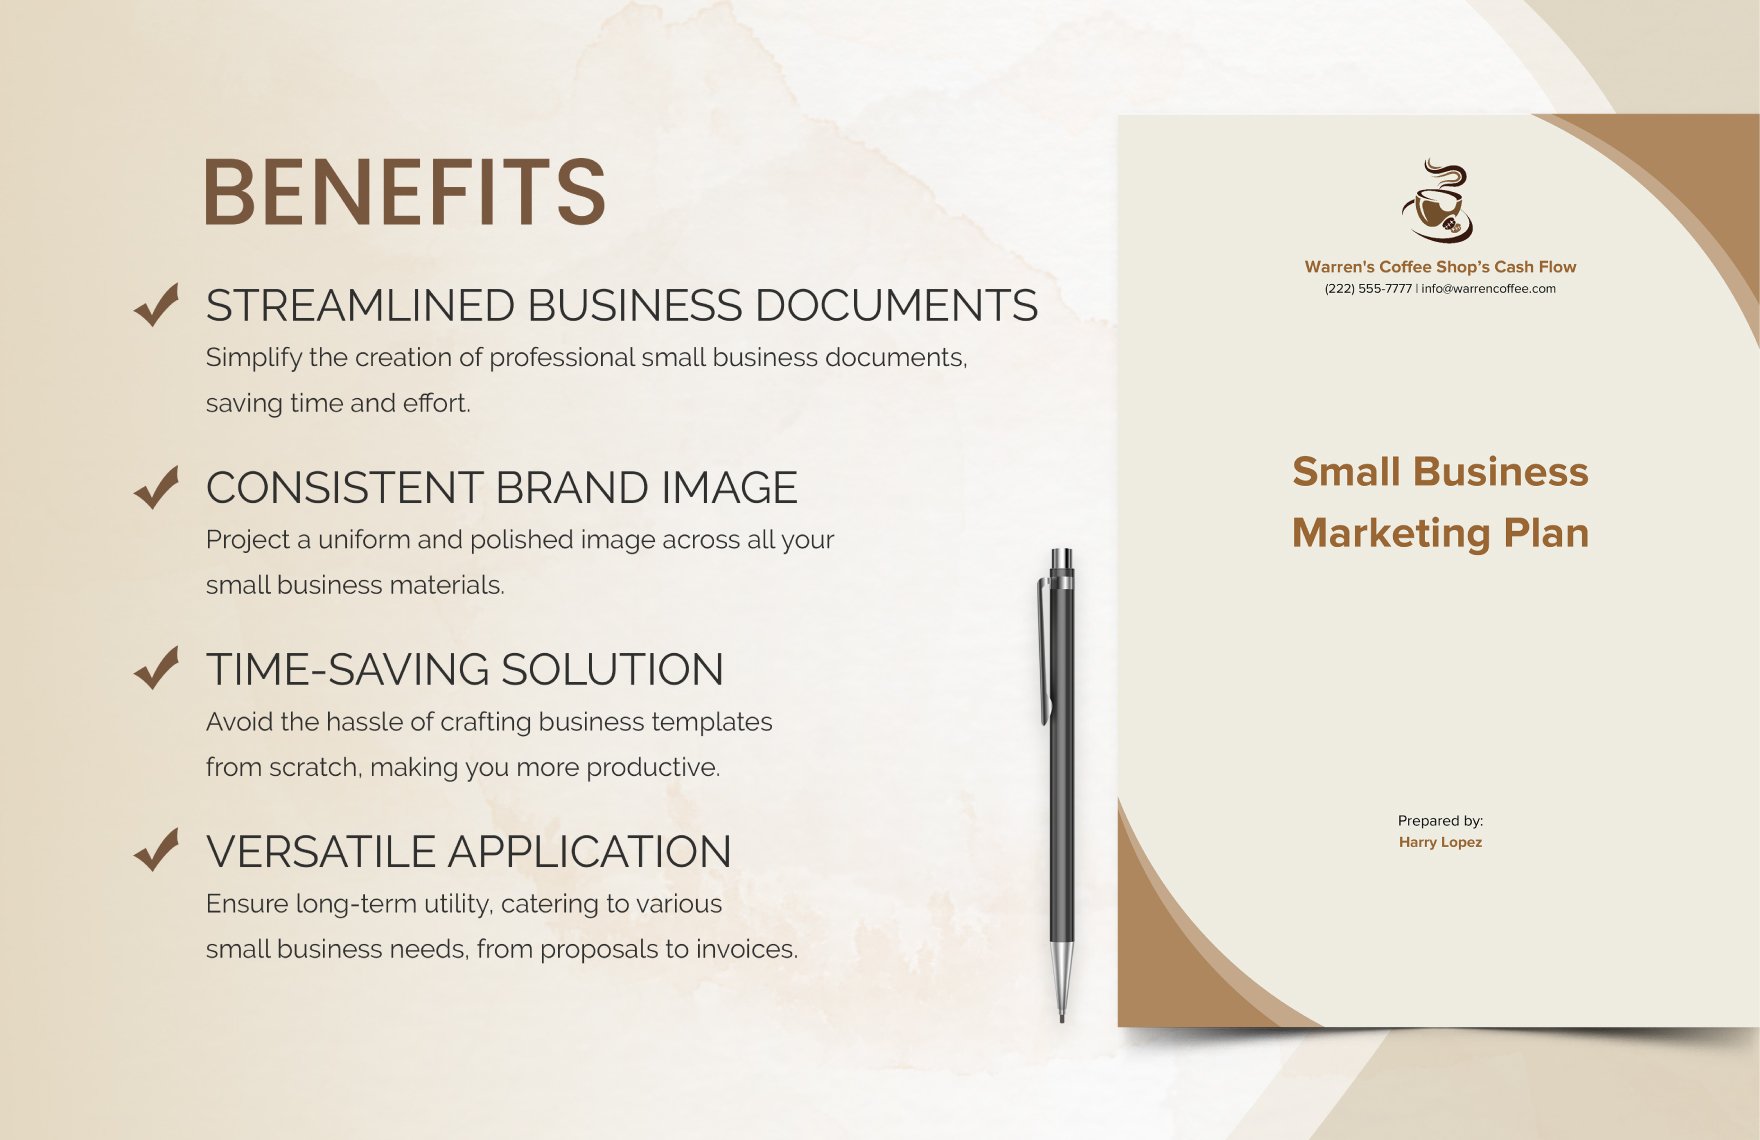 Small Business Marketing Plan Template